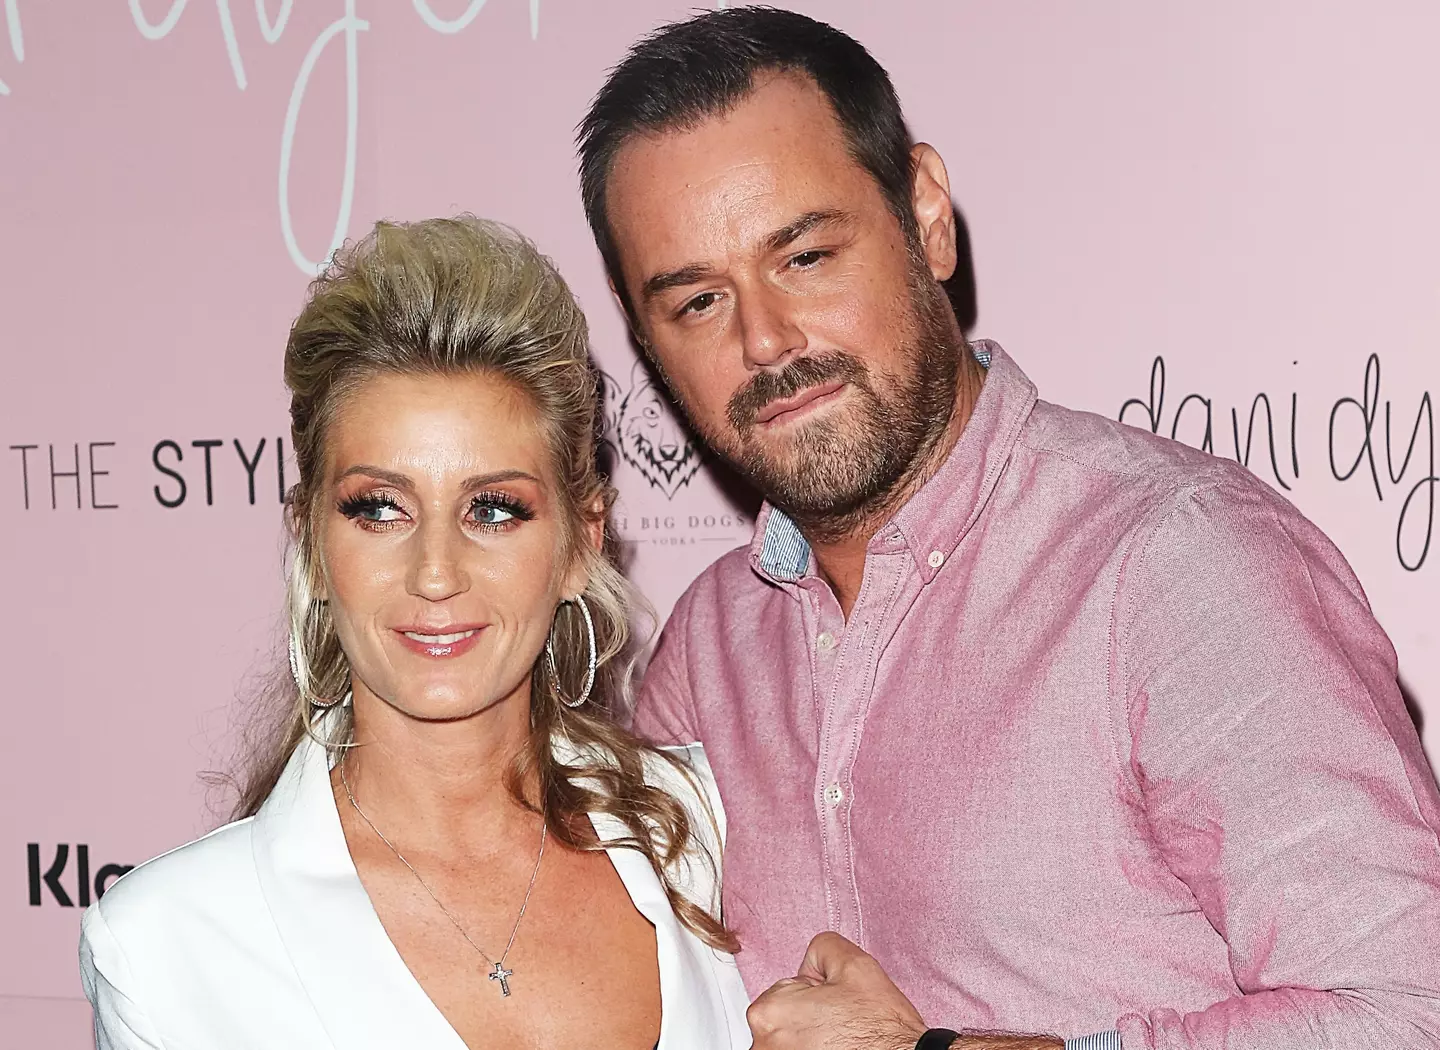 Danny Dyer and Joanne Mas first got together in 1992, but only tied the knot in 2016 after she proposed on Valentine's Day.